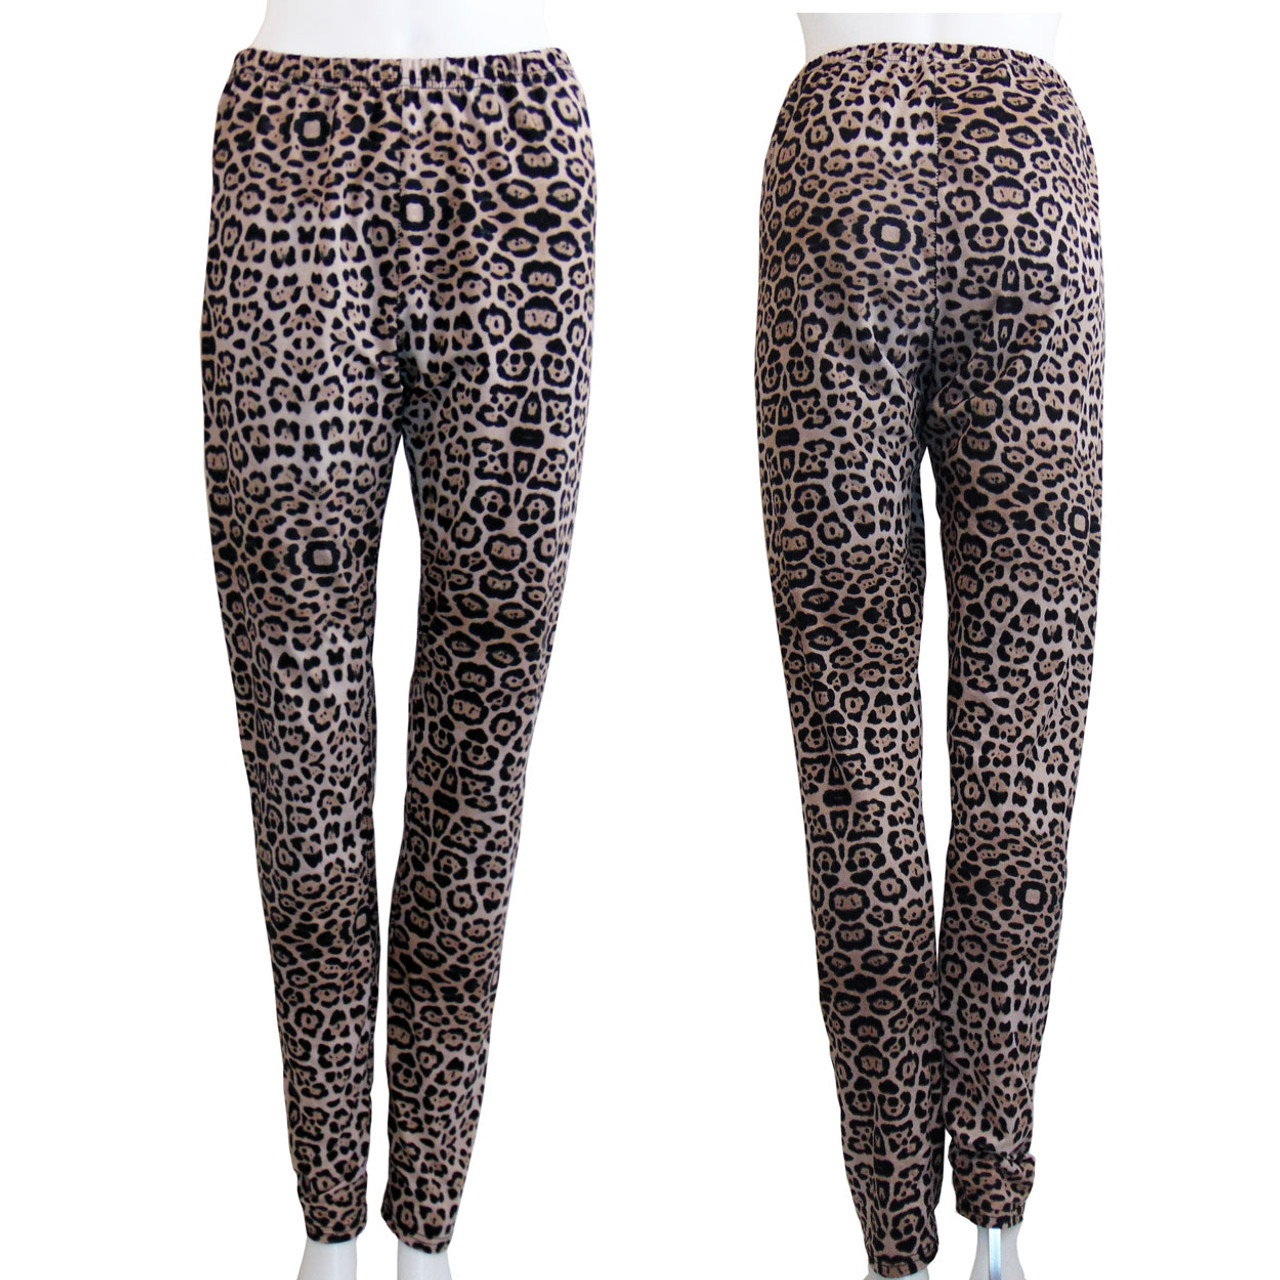 https://cdn11.bigcommerce.com/s-pm7ms50omk/images/stencil/1280x1280/products/1584/8591/suzy-shier-animal-print-leggings__13954.1551116300.jpg?c=2